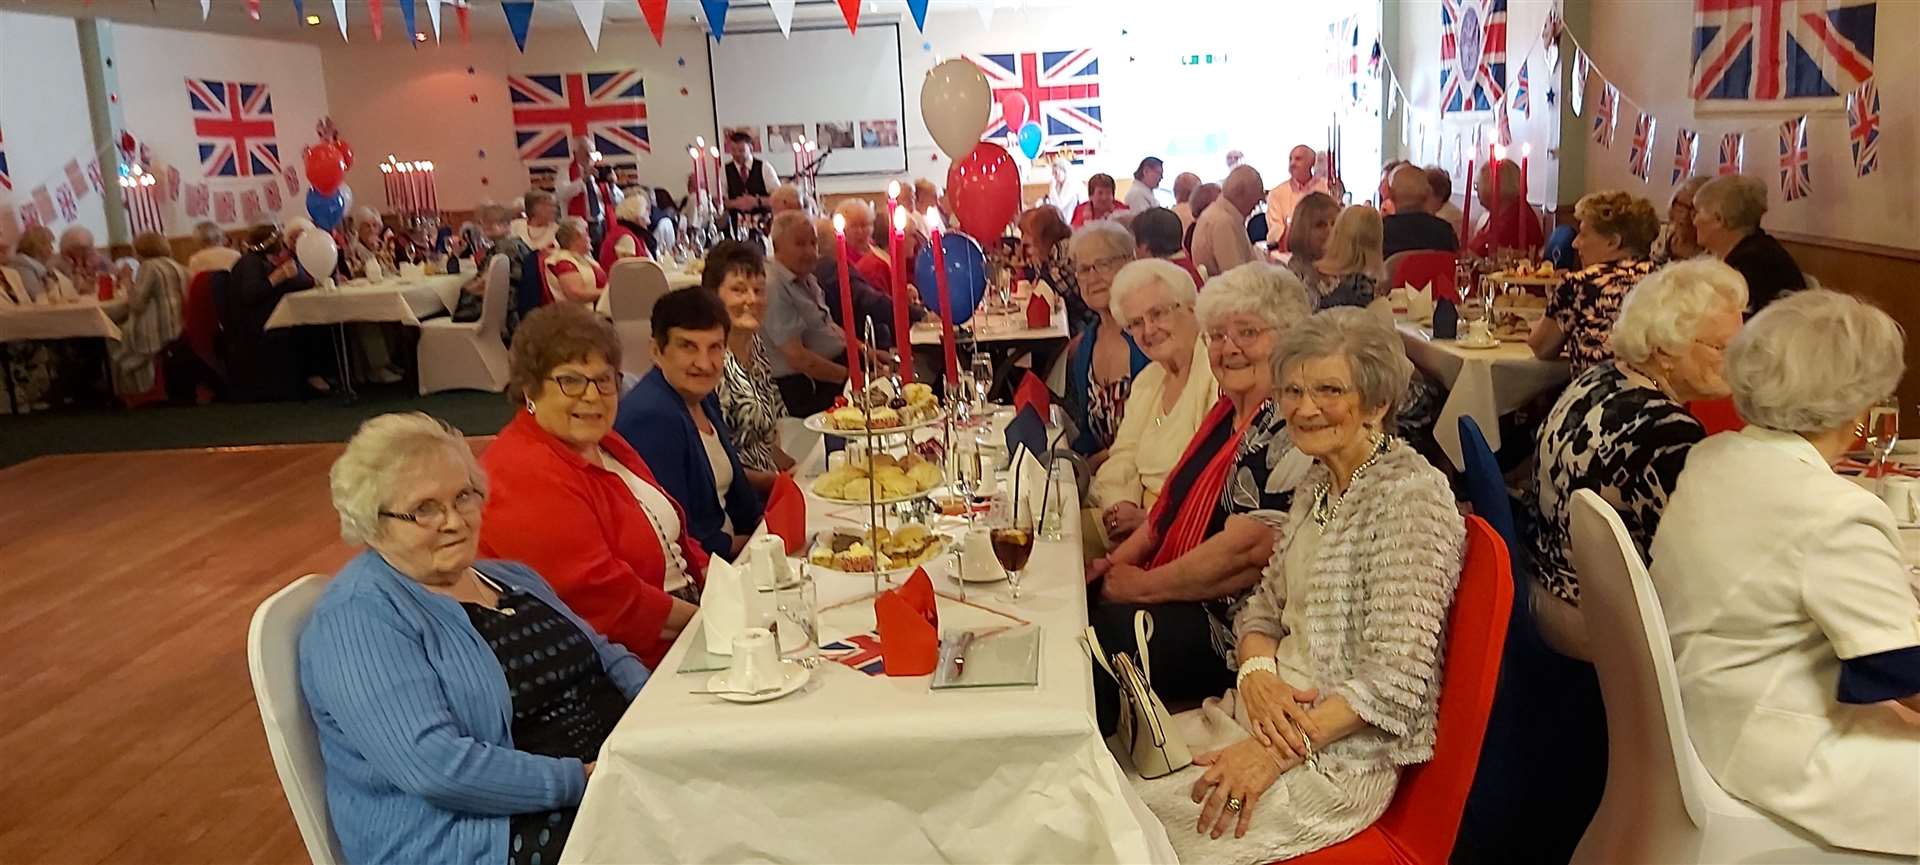 There were 140 senior citizens at the Lossiemouth FC social club.